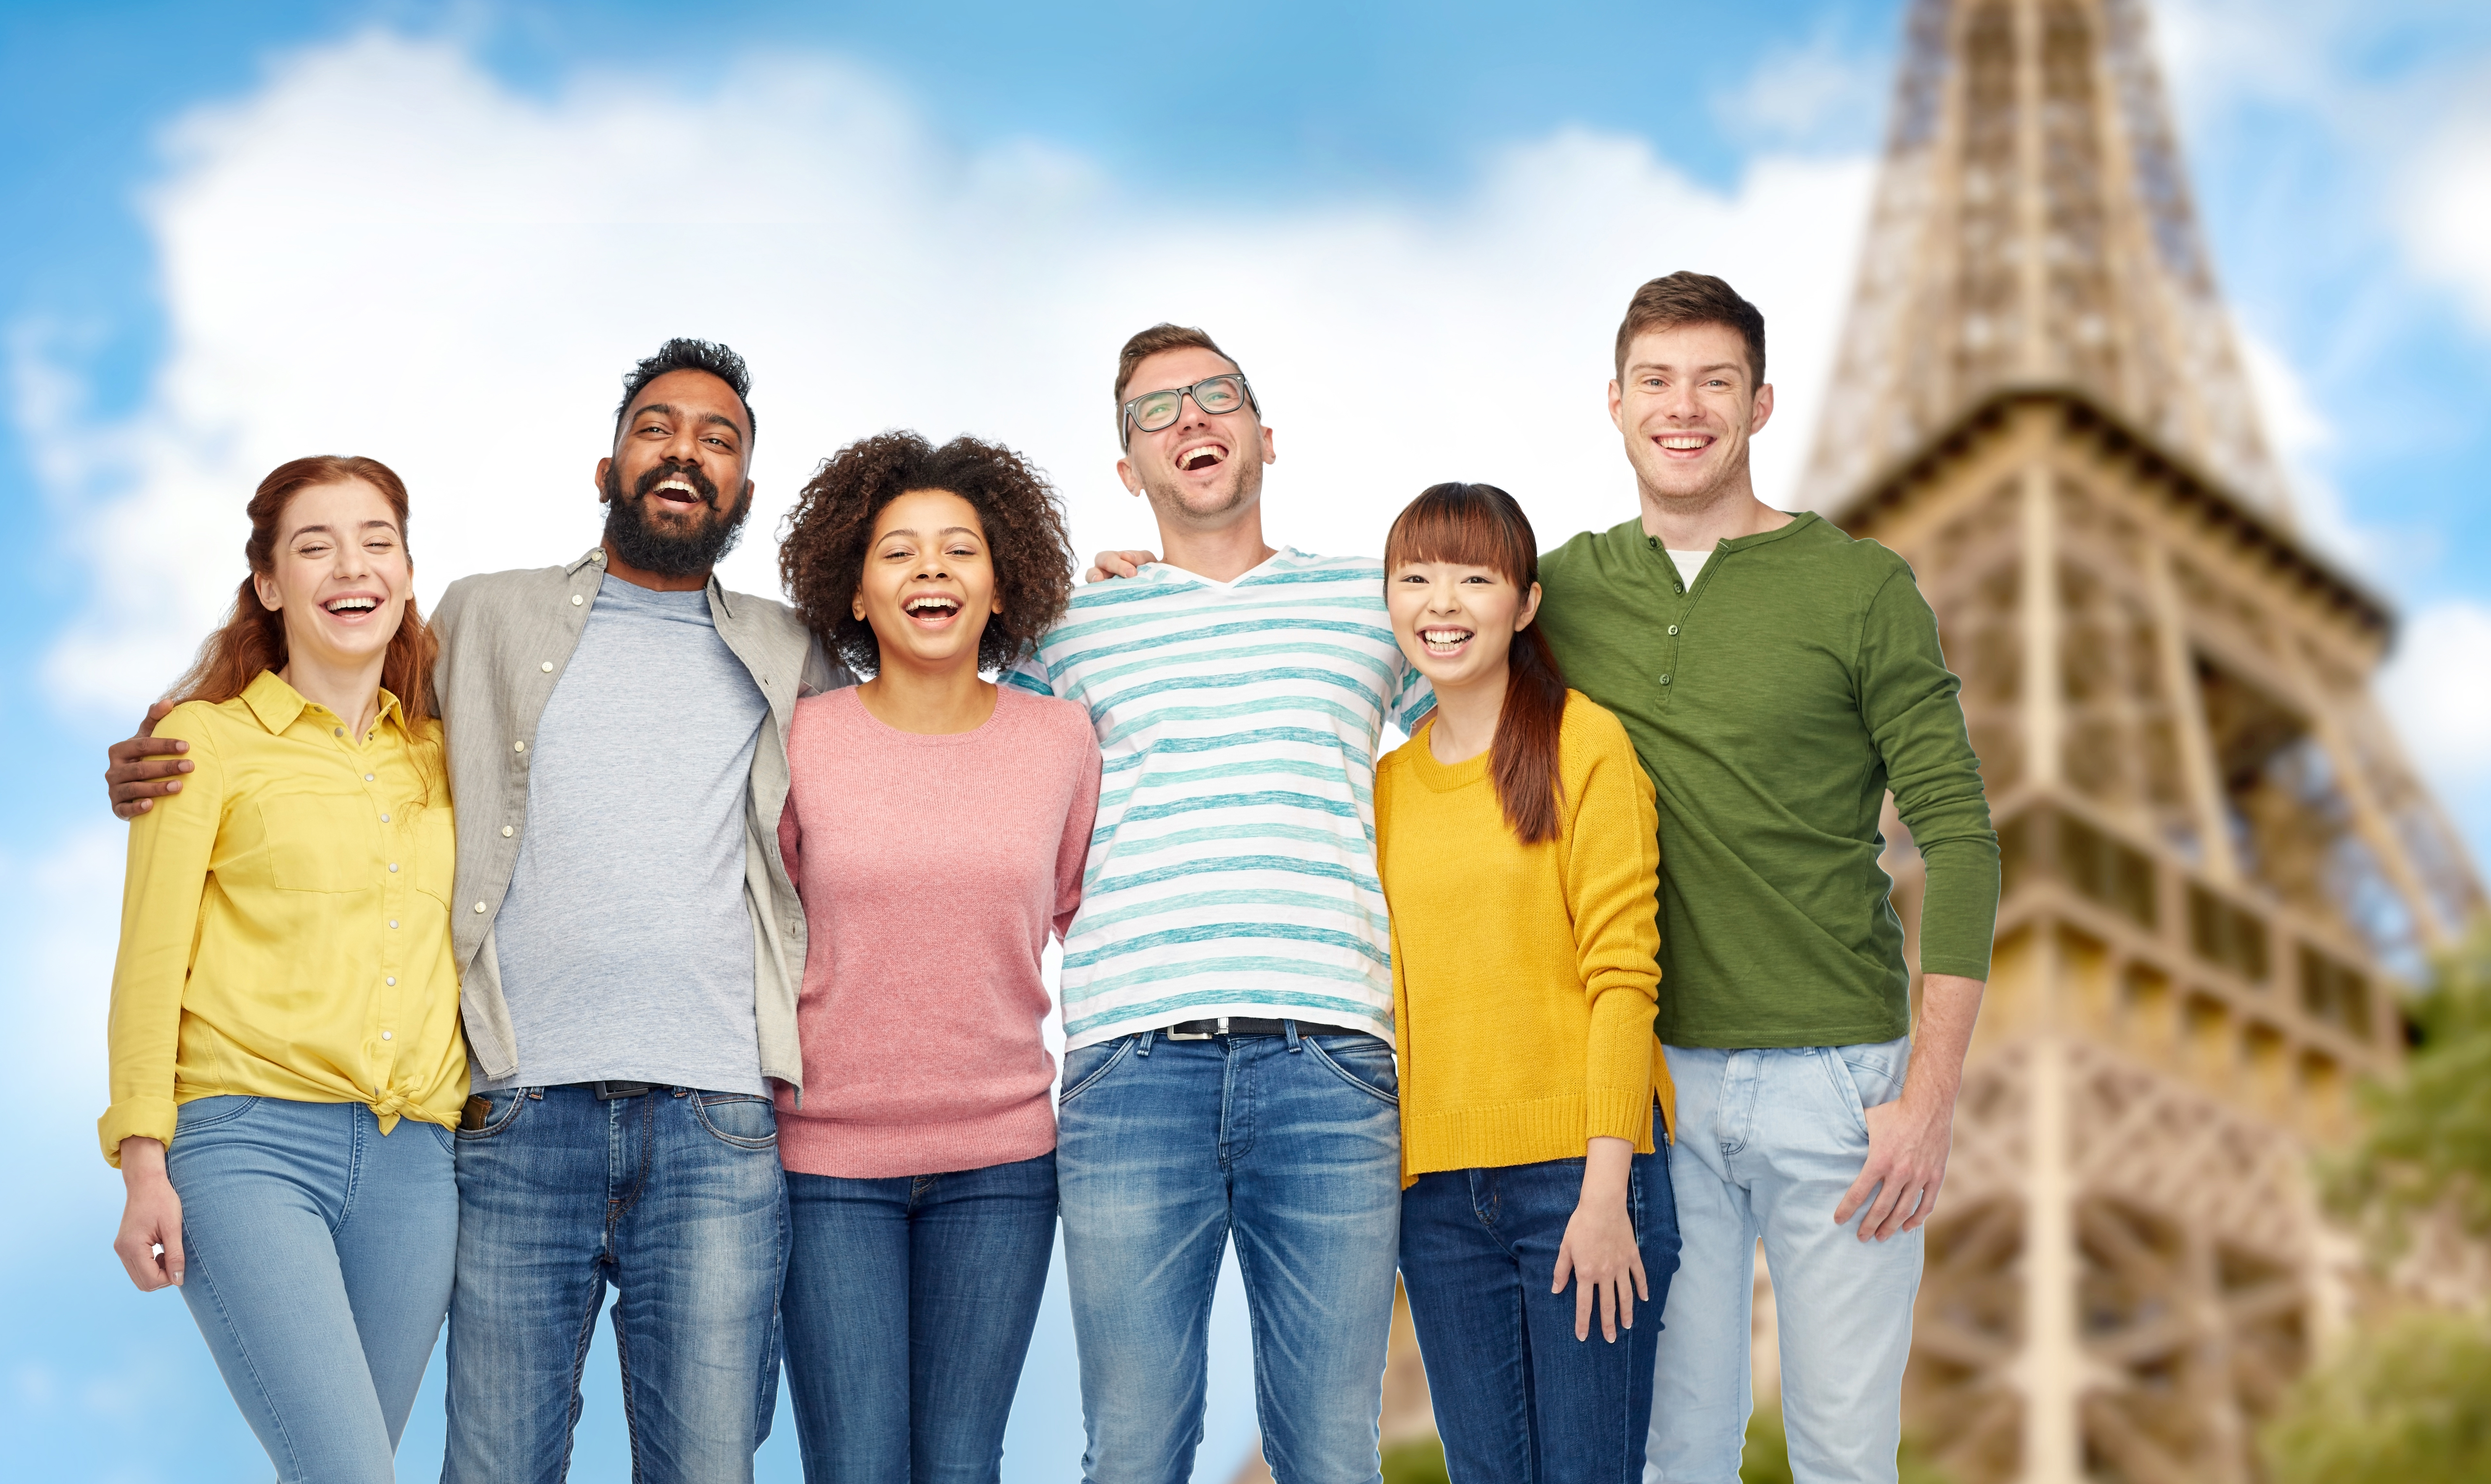 French Language Group Classes in San Francisco, CA, Help Sharpen Minds and Broaden Horizons